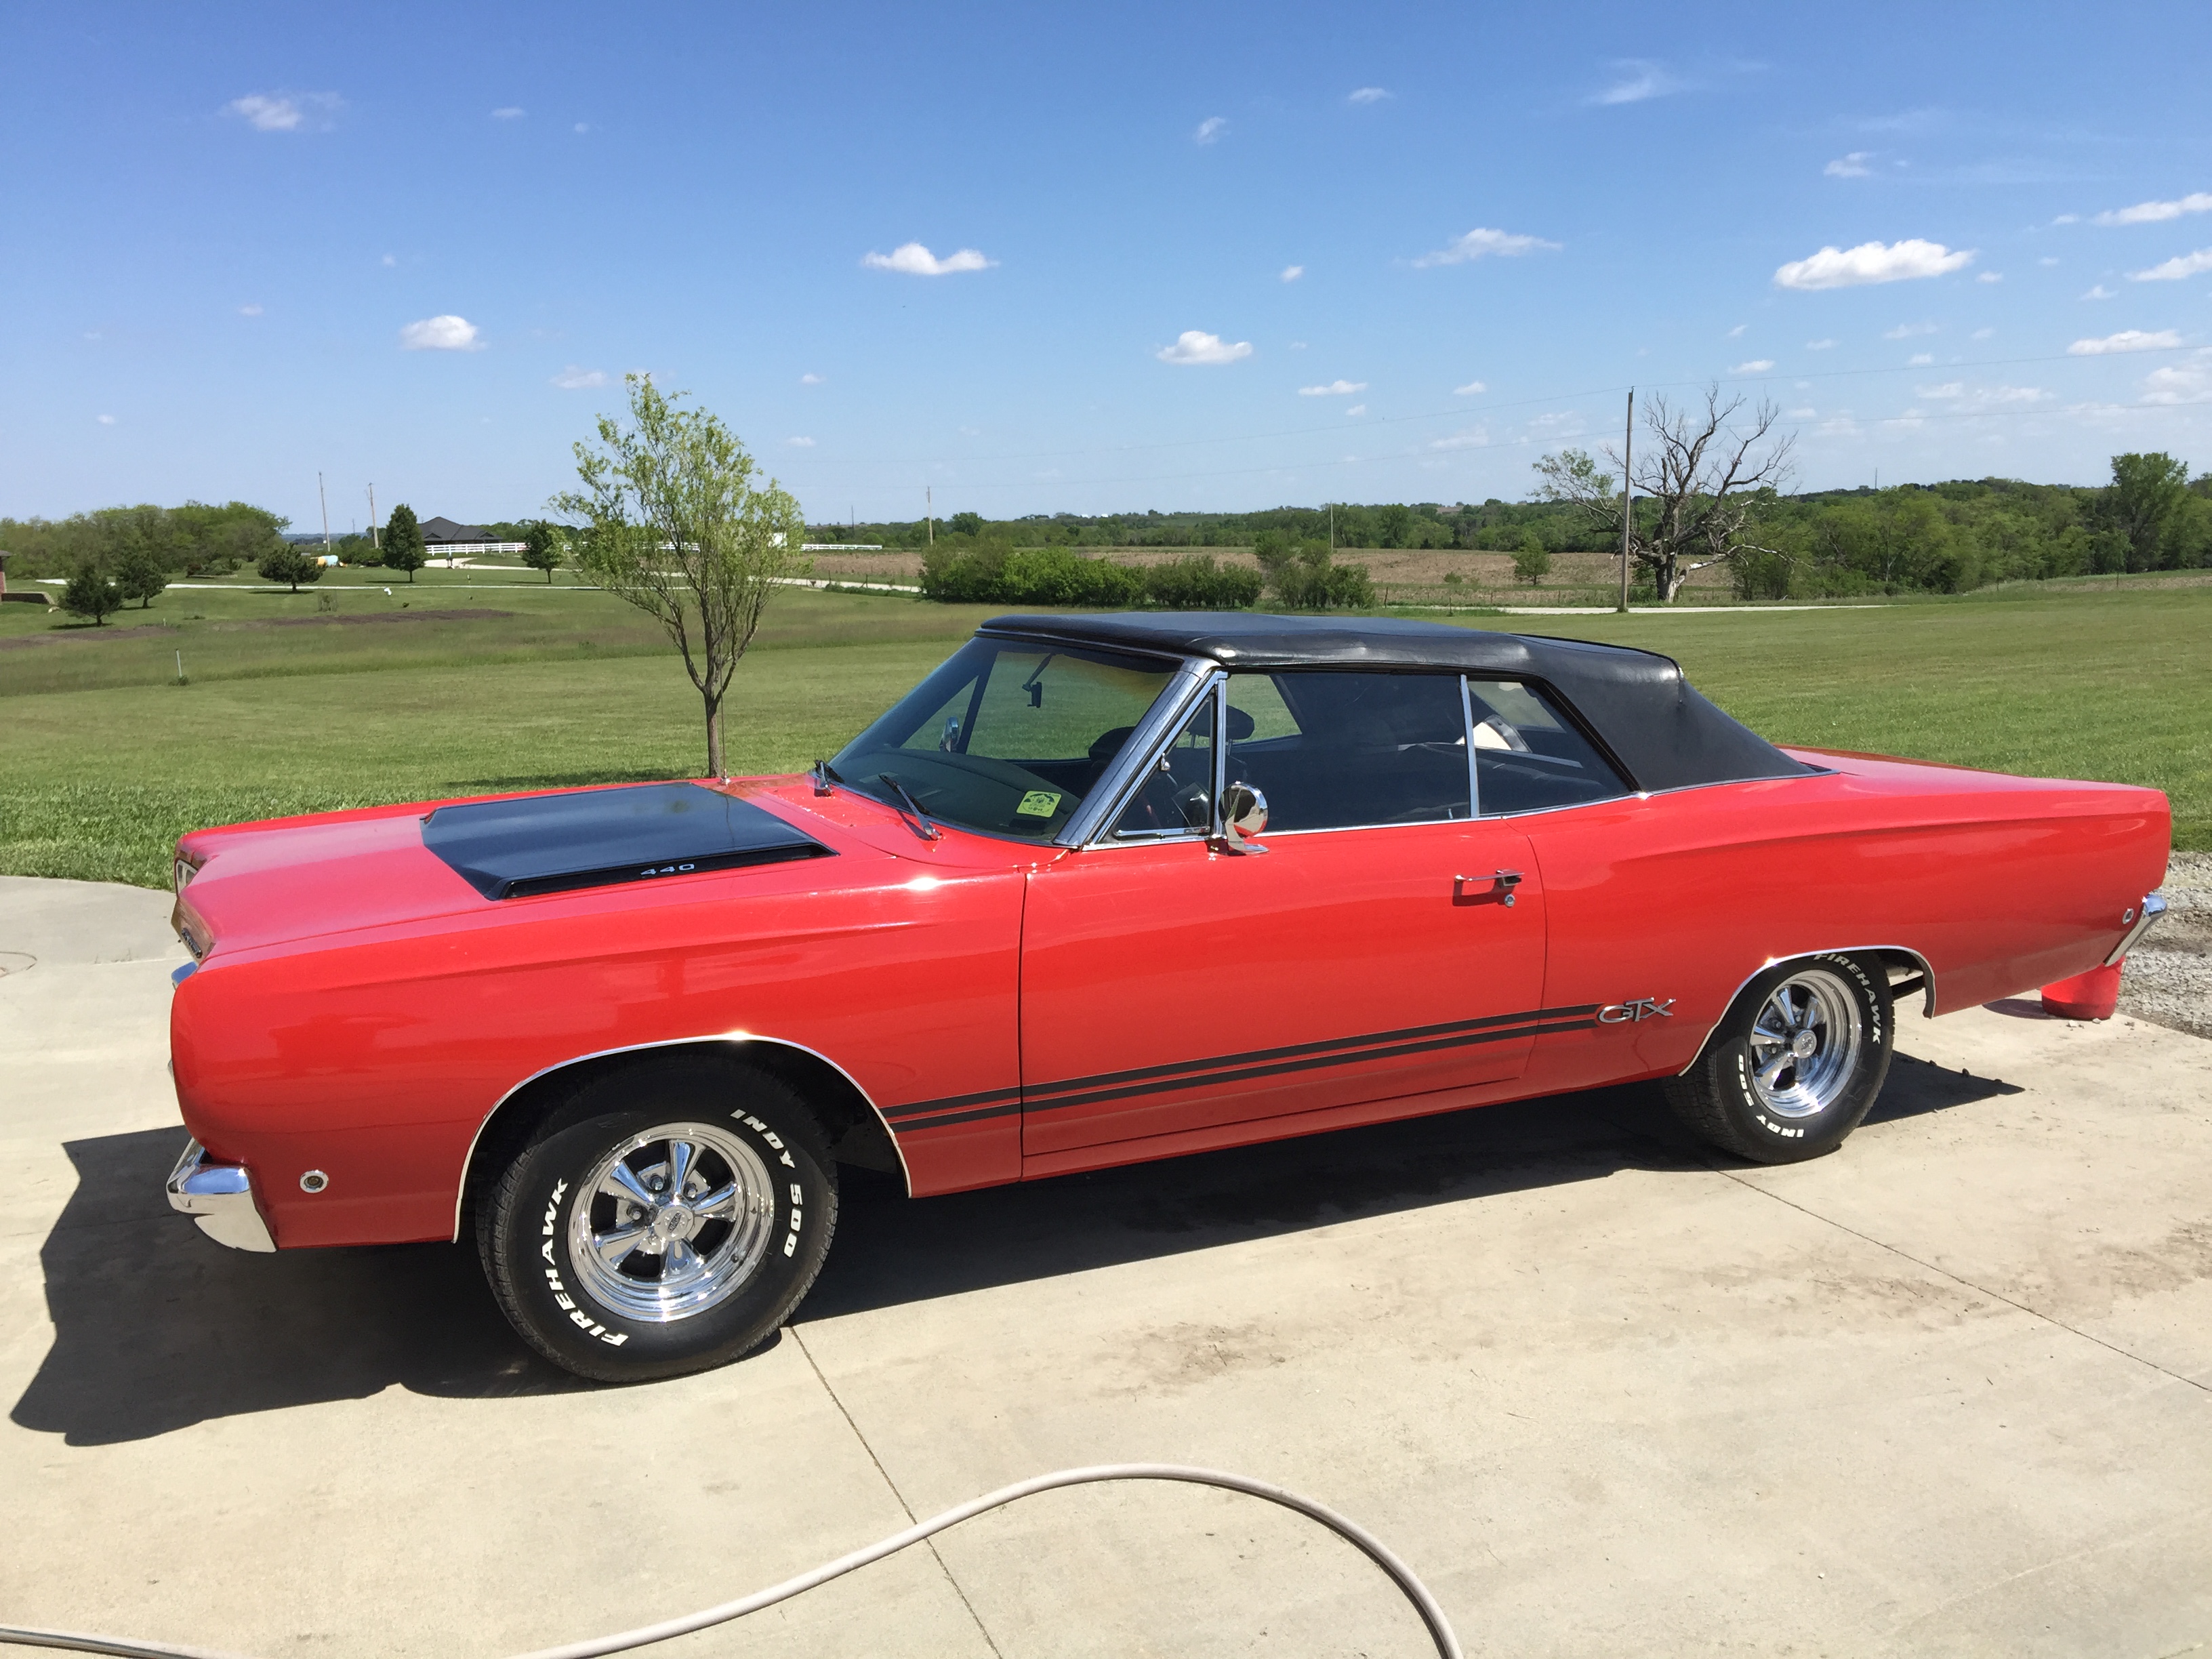 1968 Plymouth GTX Clone, Hot Rod Repair—Worth Drooling Over